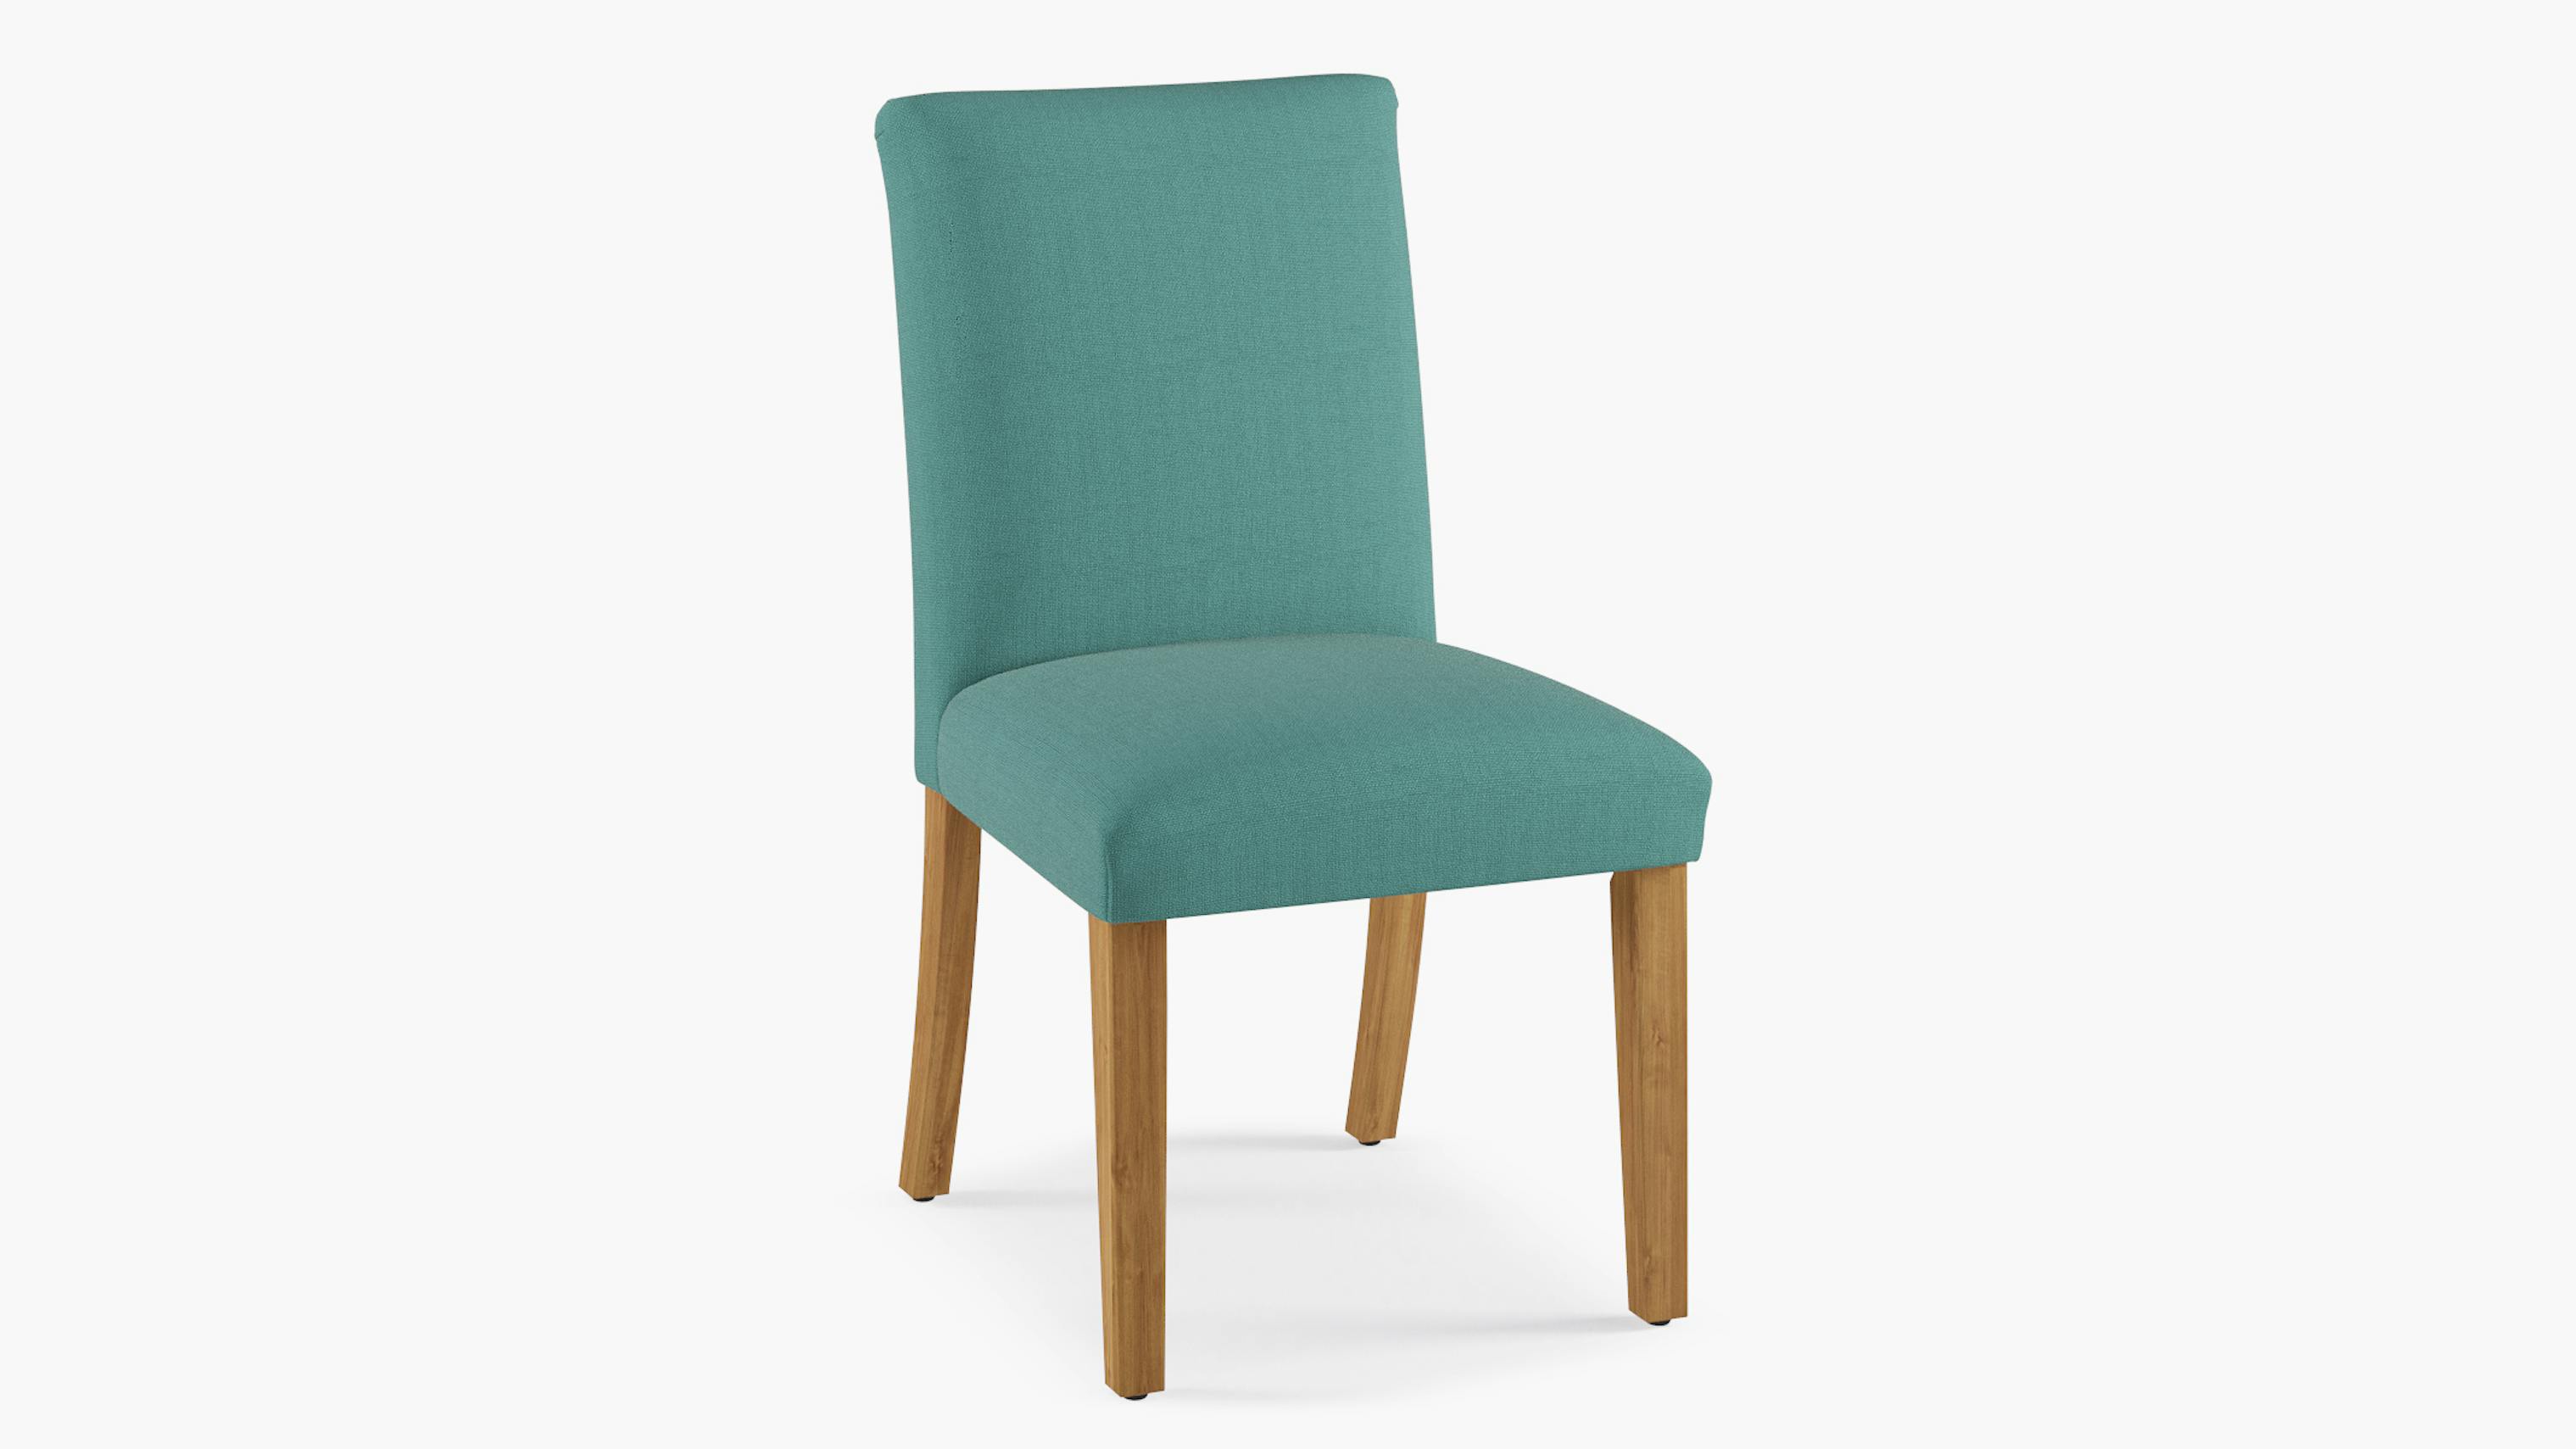 assembled dining room chairs